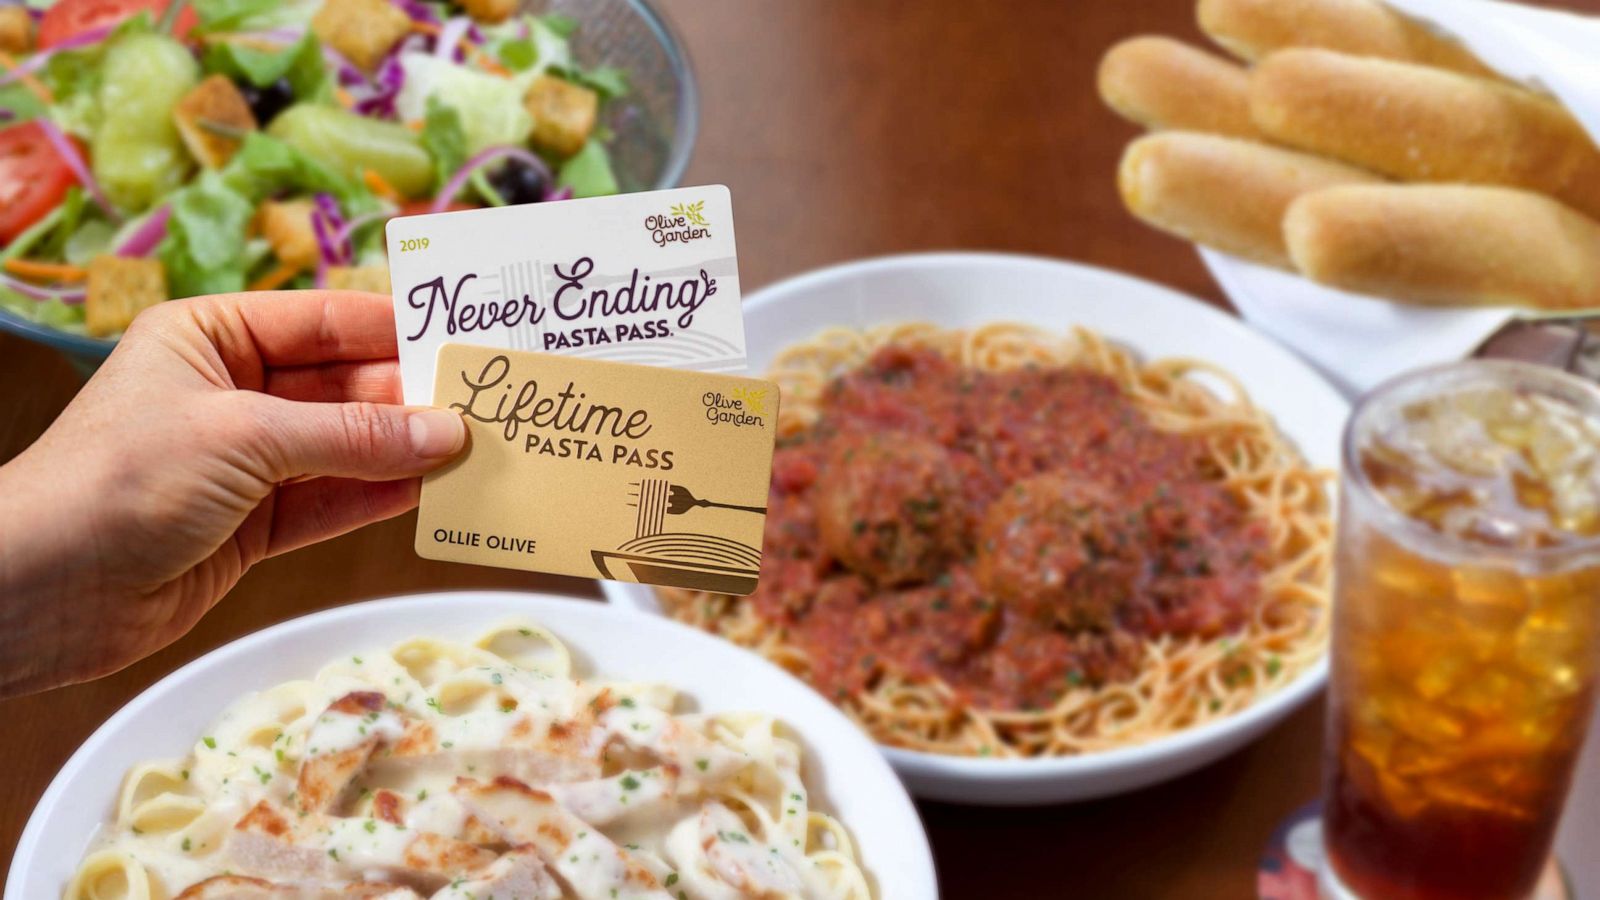 Olive Garden Fans Can Snag An Exclusive Lifetime Pasta Pass For